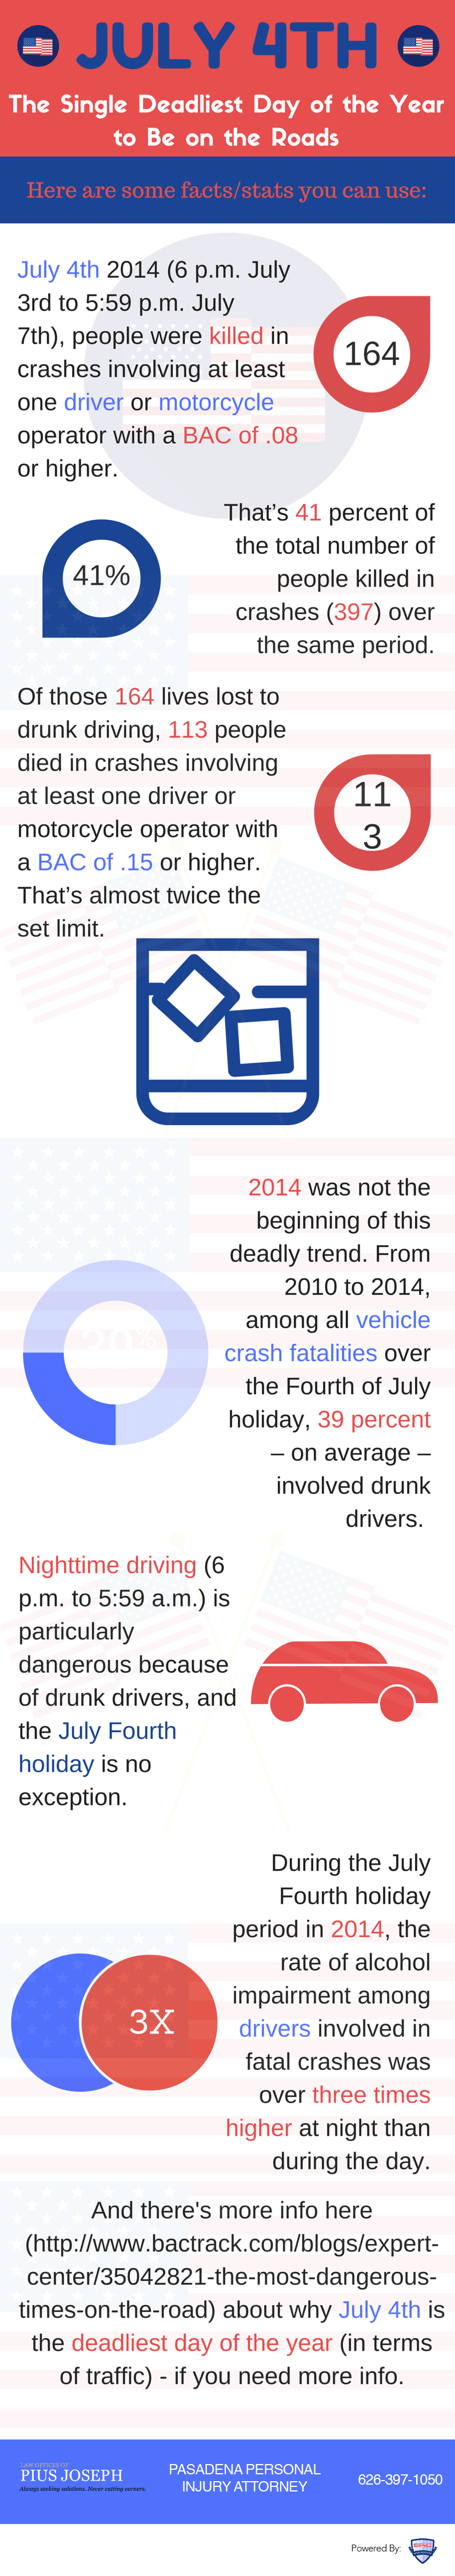 July 4th & Fatal Car Accidents: Infographic